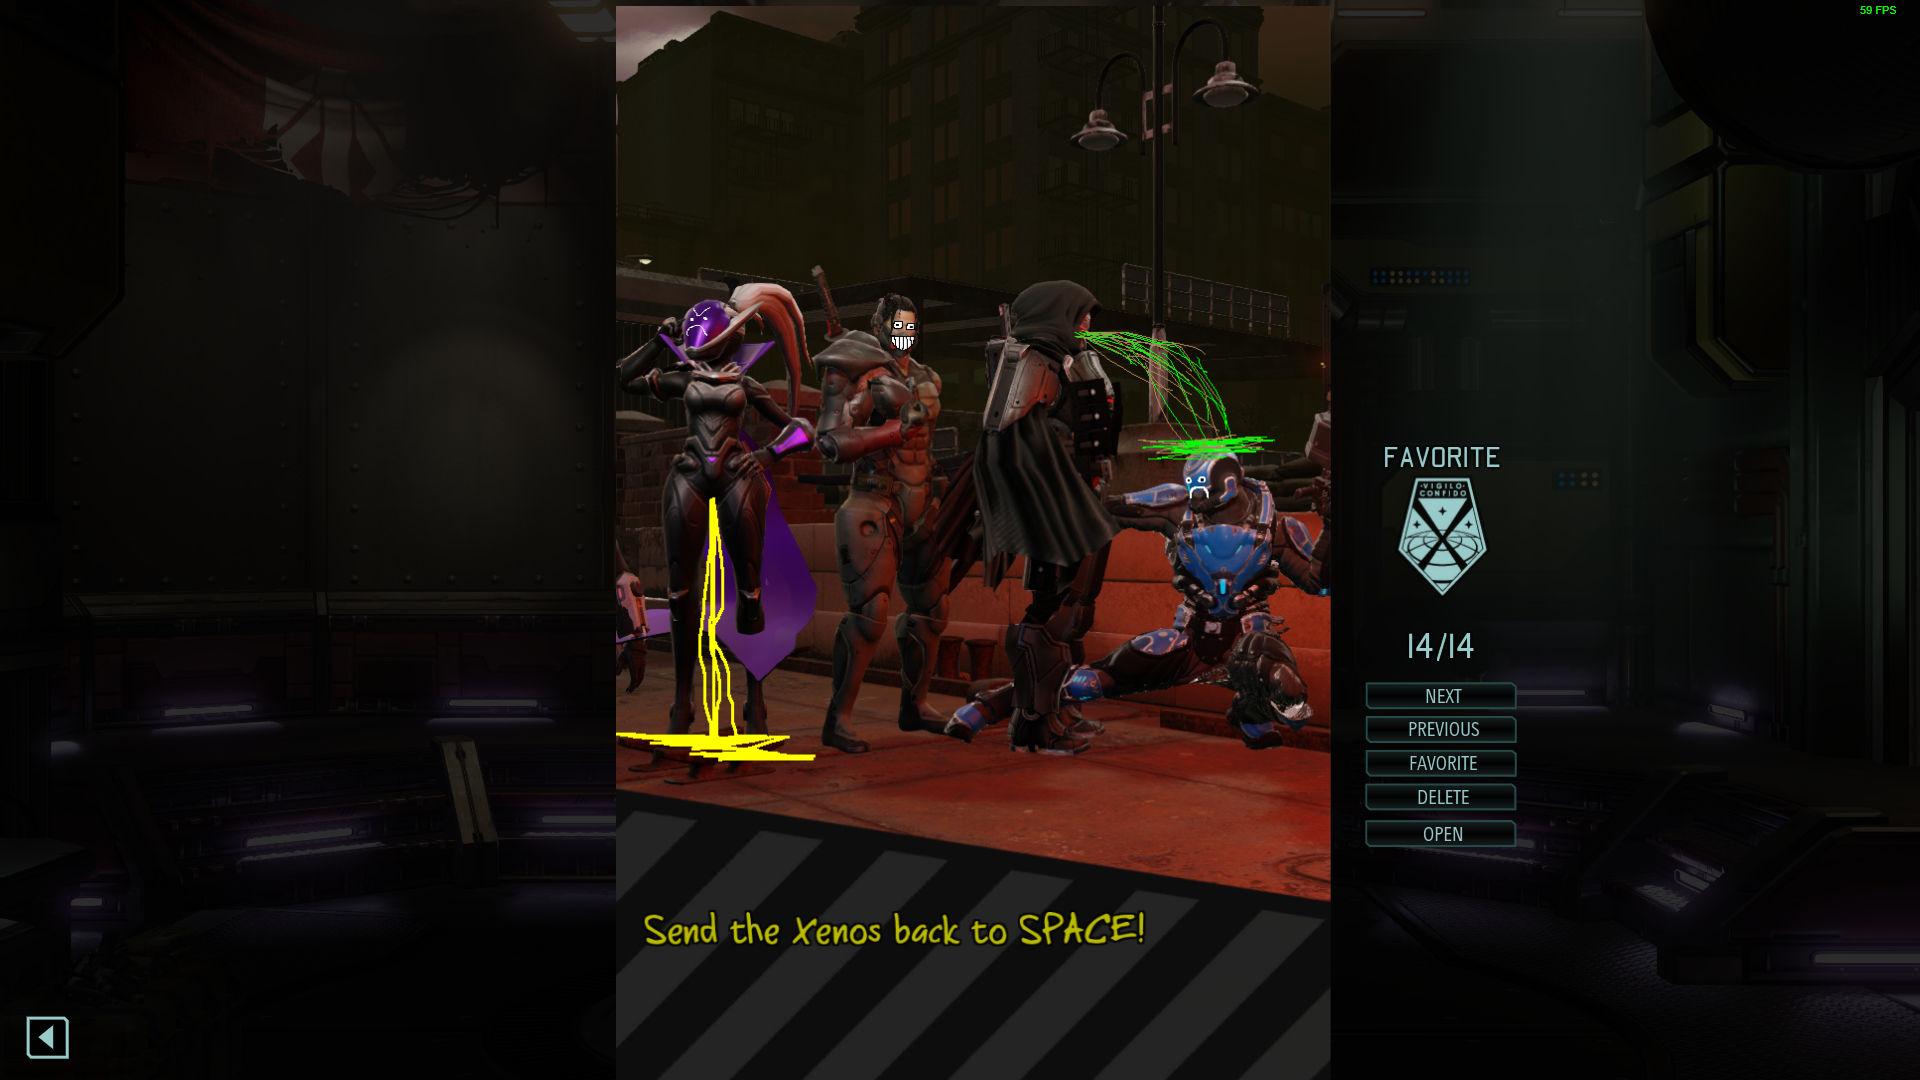 XCOM 2 Accessing Photobooth Folder & Editing Posters Guide - Editing the posters - ACE3E6B